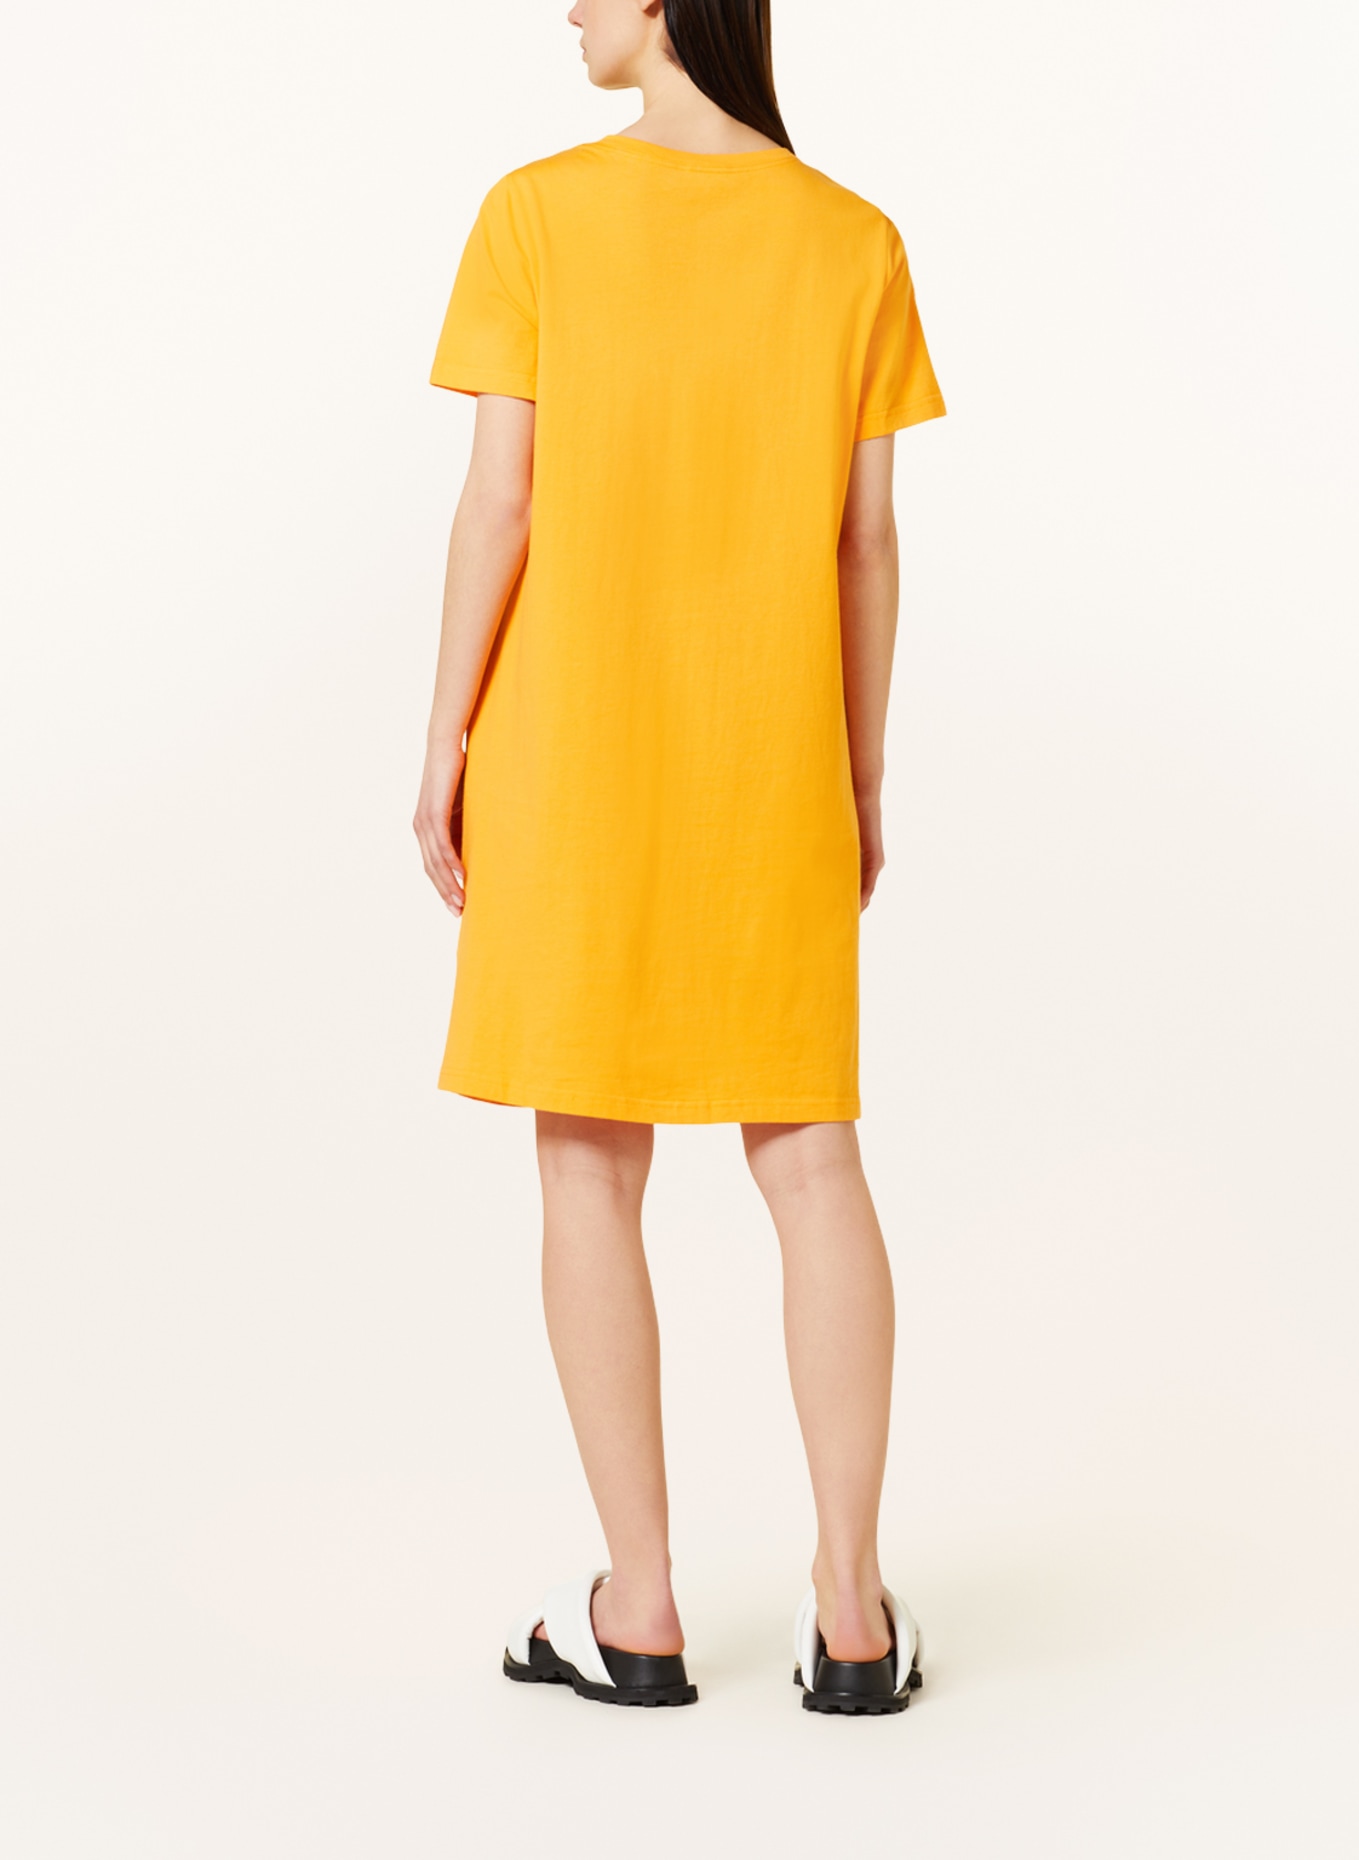 oui Linen dress in mixed materials, Color: ORANGE (Image 3)